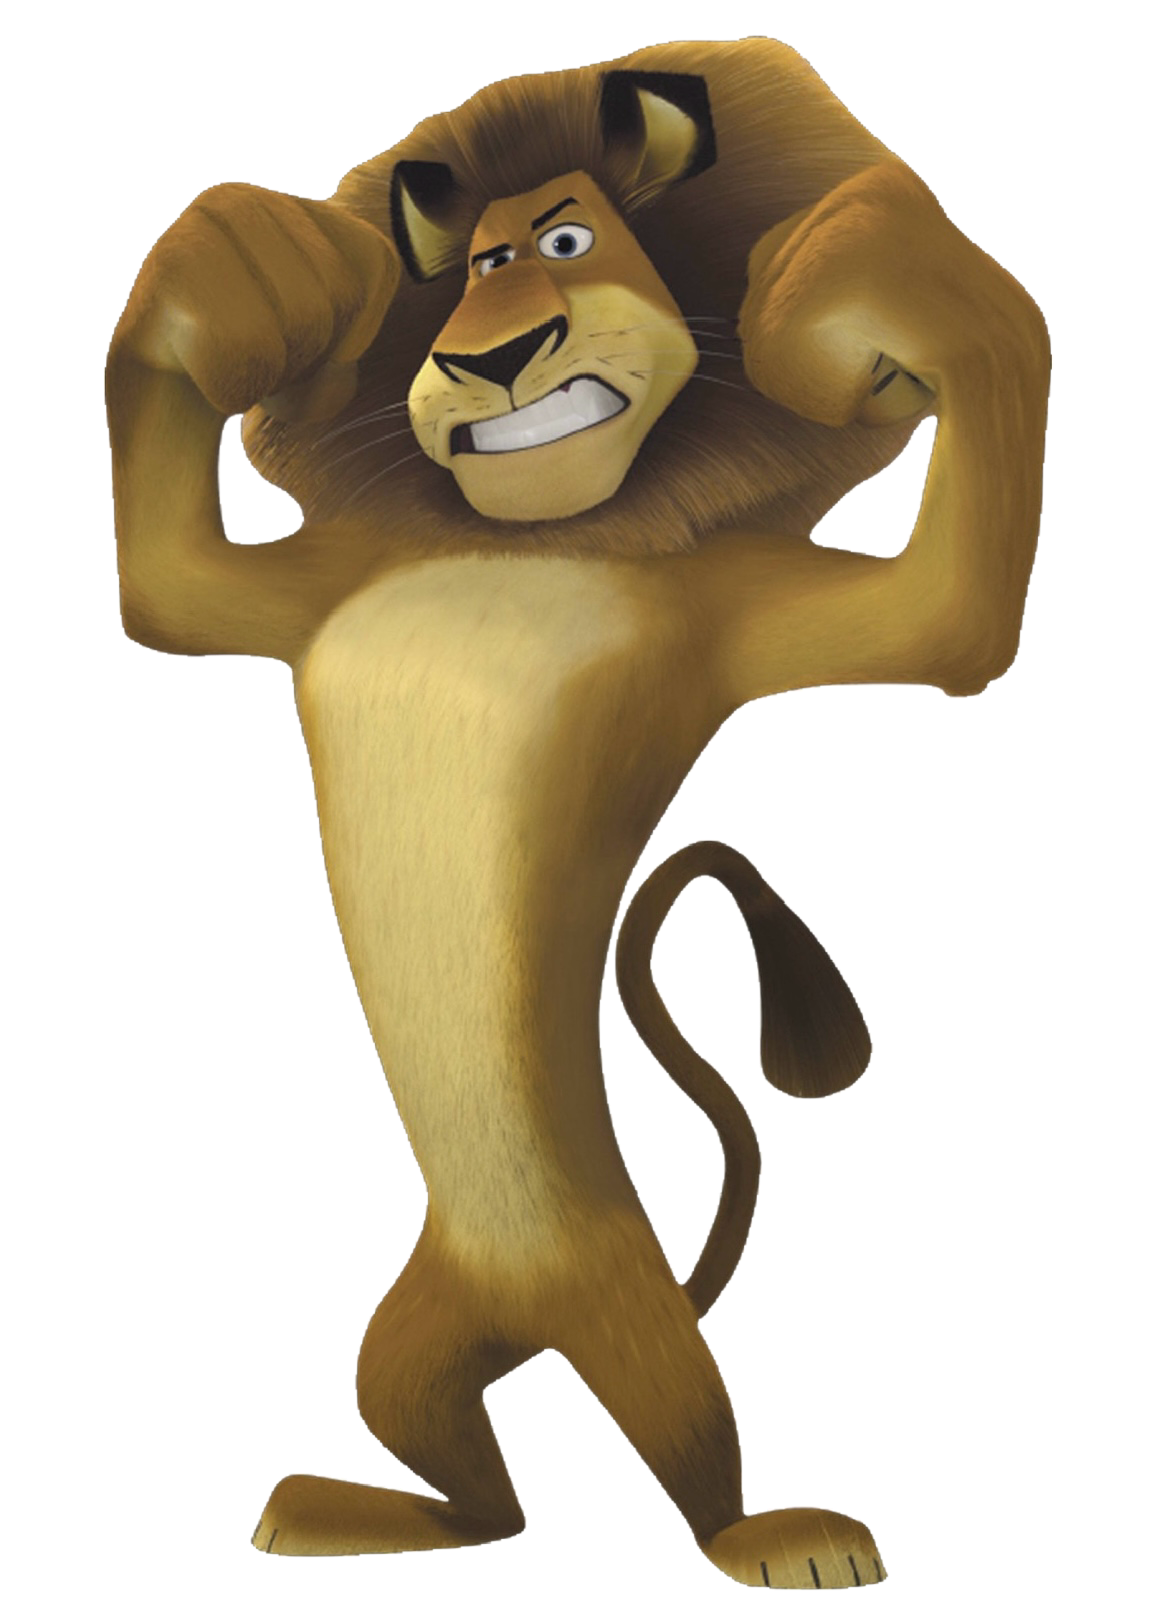 Alex The lion Vector 2 png by Miguelucm on DeviantArt